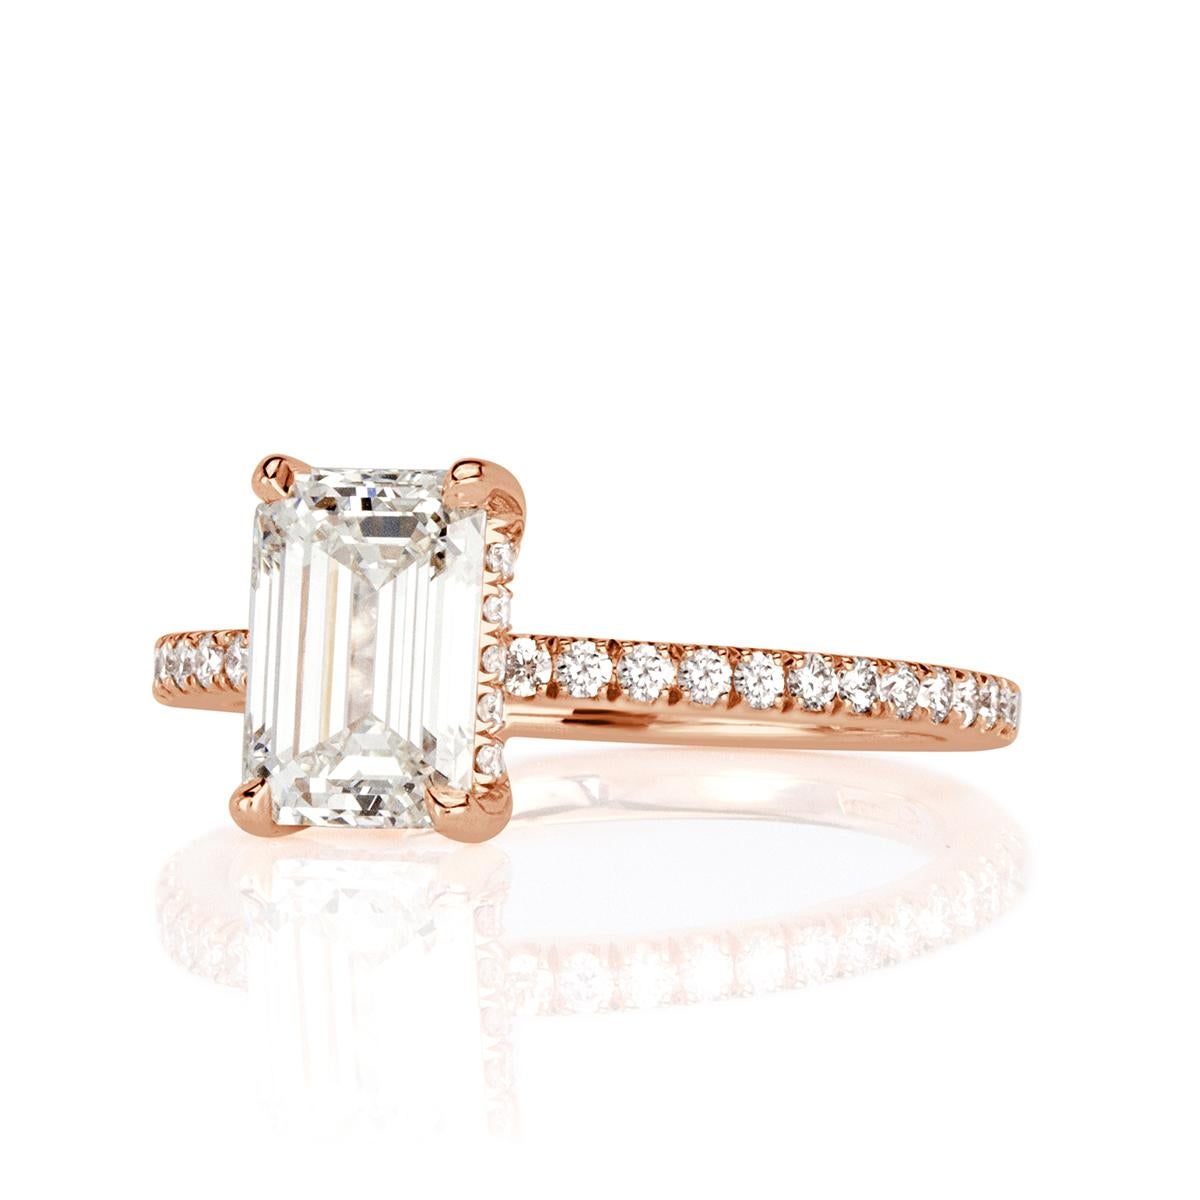 Custom created in 18k rose gold, this exquisite diamond engagement ring features a gorgeous 1.51ct emerald cut center diamond, GIA certified at I in color, VS1 in clarity. It has exceptional measurements of 8.04 x 5.54mm in addition of being graded